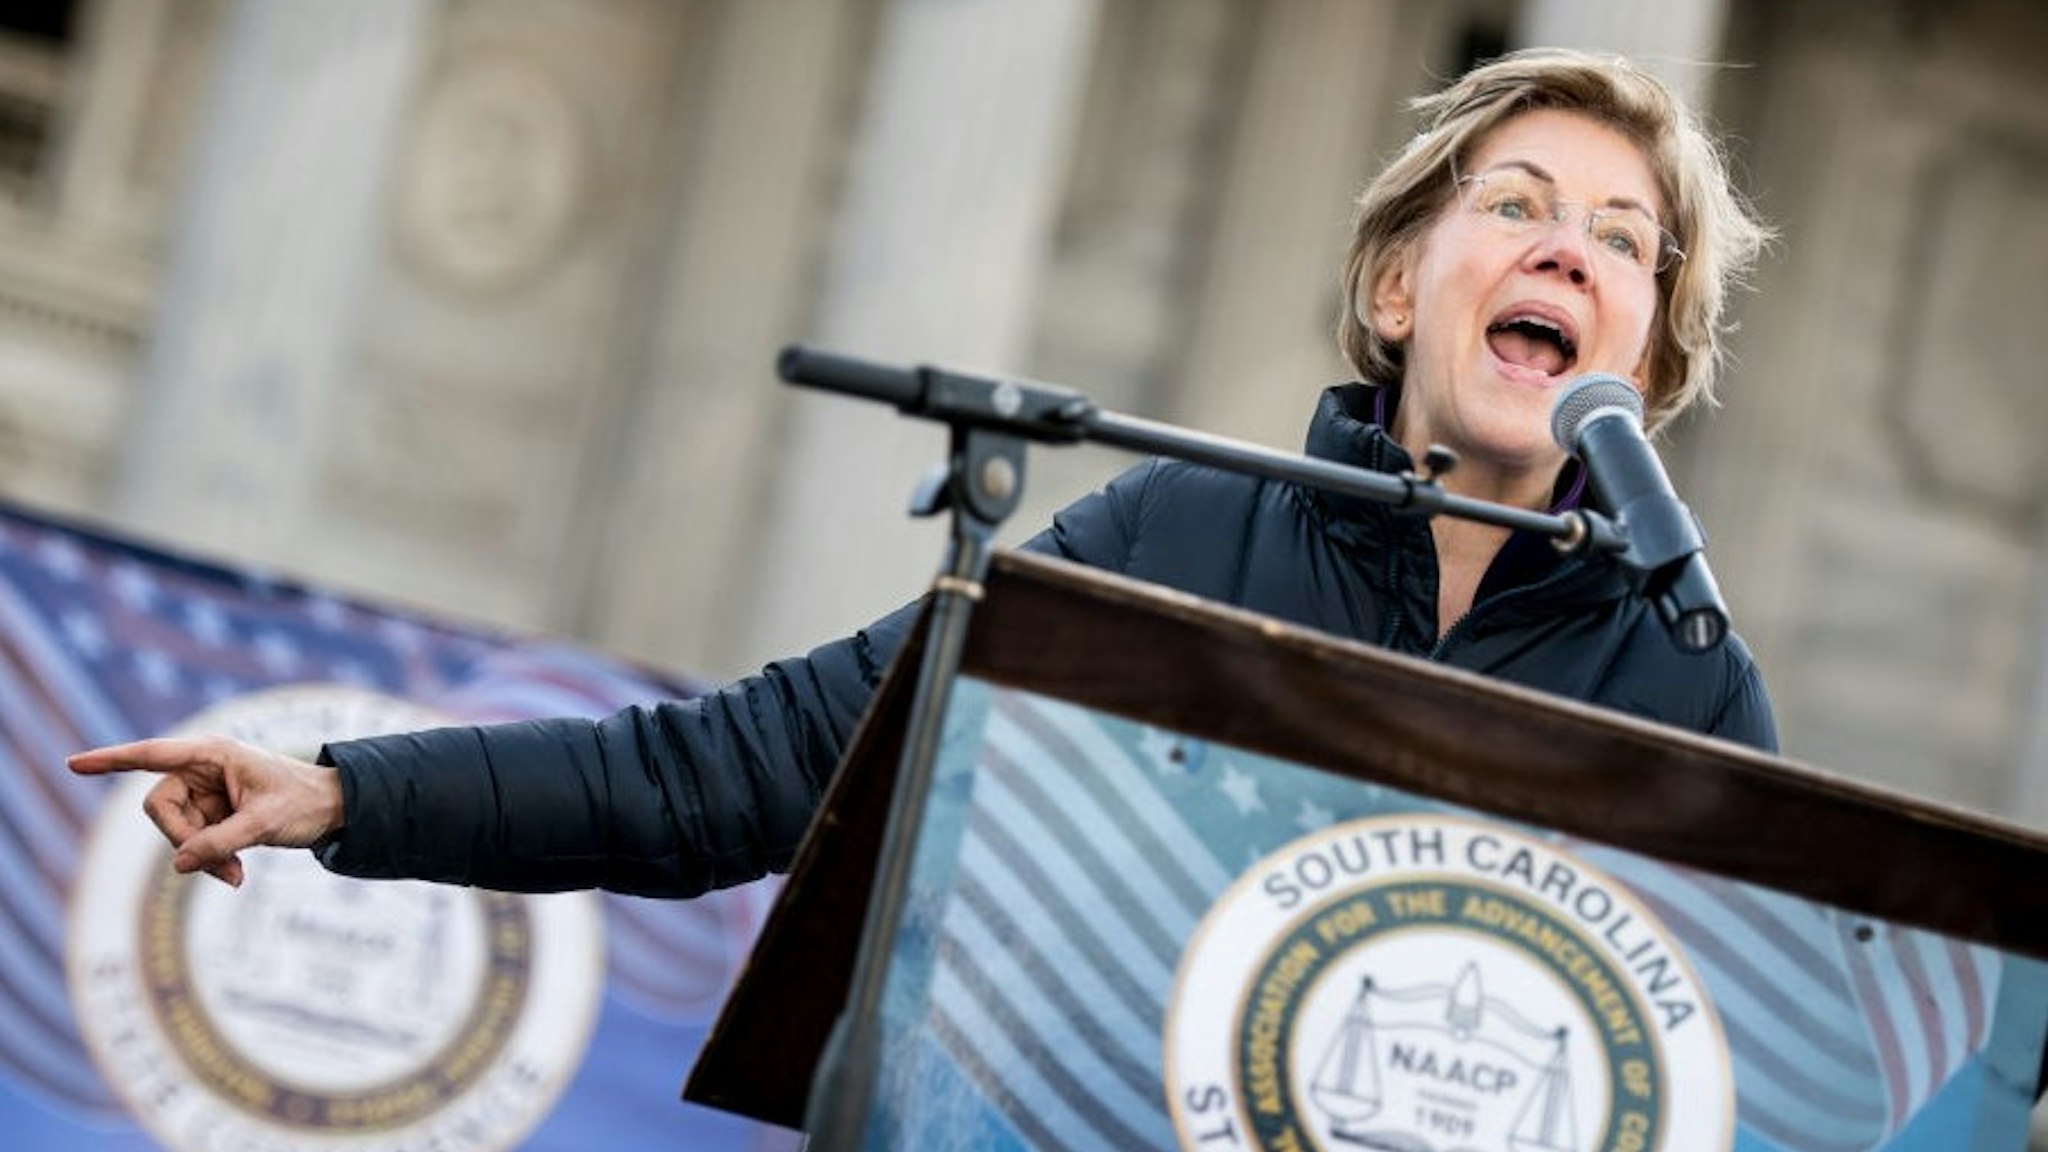 COLUMBIA, SC - JANUARY 20: Democratic presidential candidate Sen. Elizabeth Warren (D-MA) speaks to the crowd during the King Day at the Dome rally on January 20, 2020 in Columbia, South Carolina. The event, first held in 2000 in opposition to the display of the Confederate battle flag at the statehouse, attracted more than a handful Democratic presidential candidates looking for votes in the early primary state. (Photo by